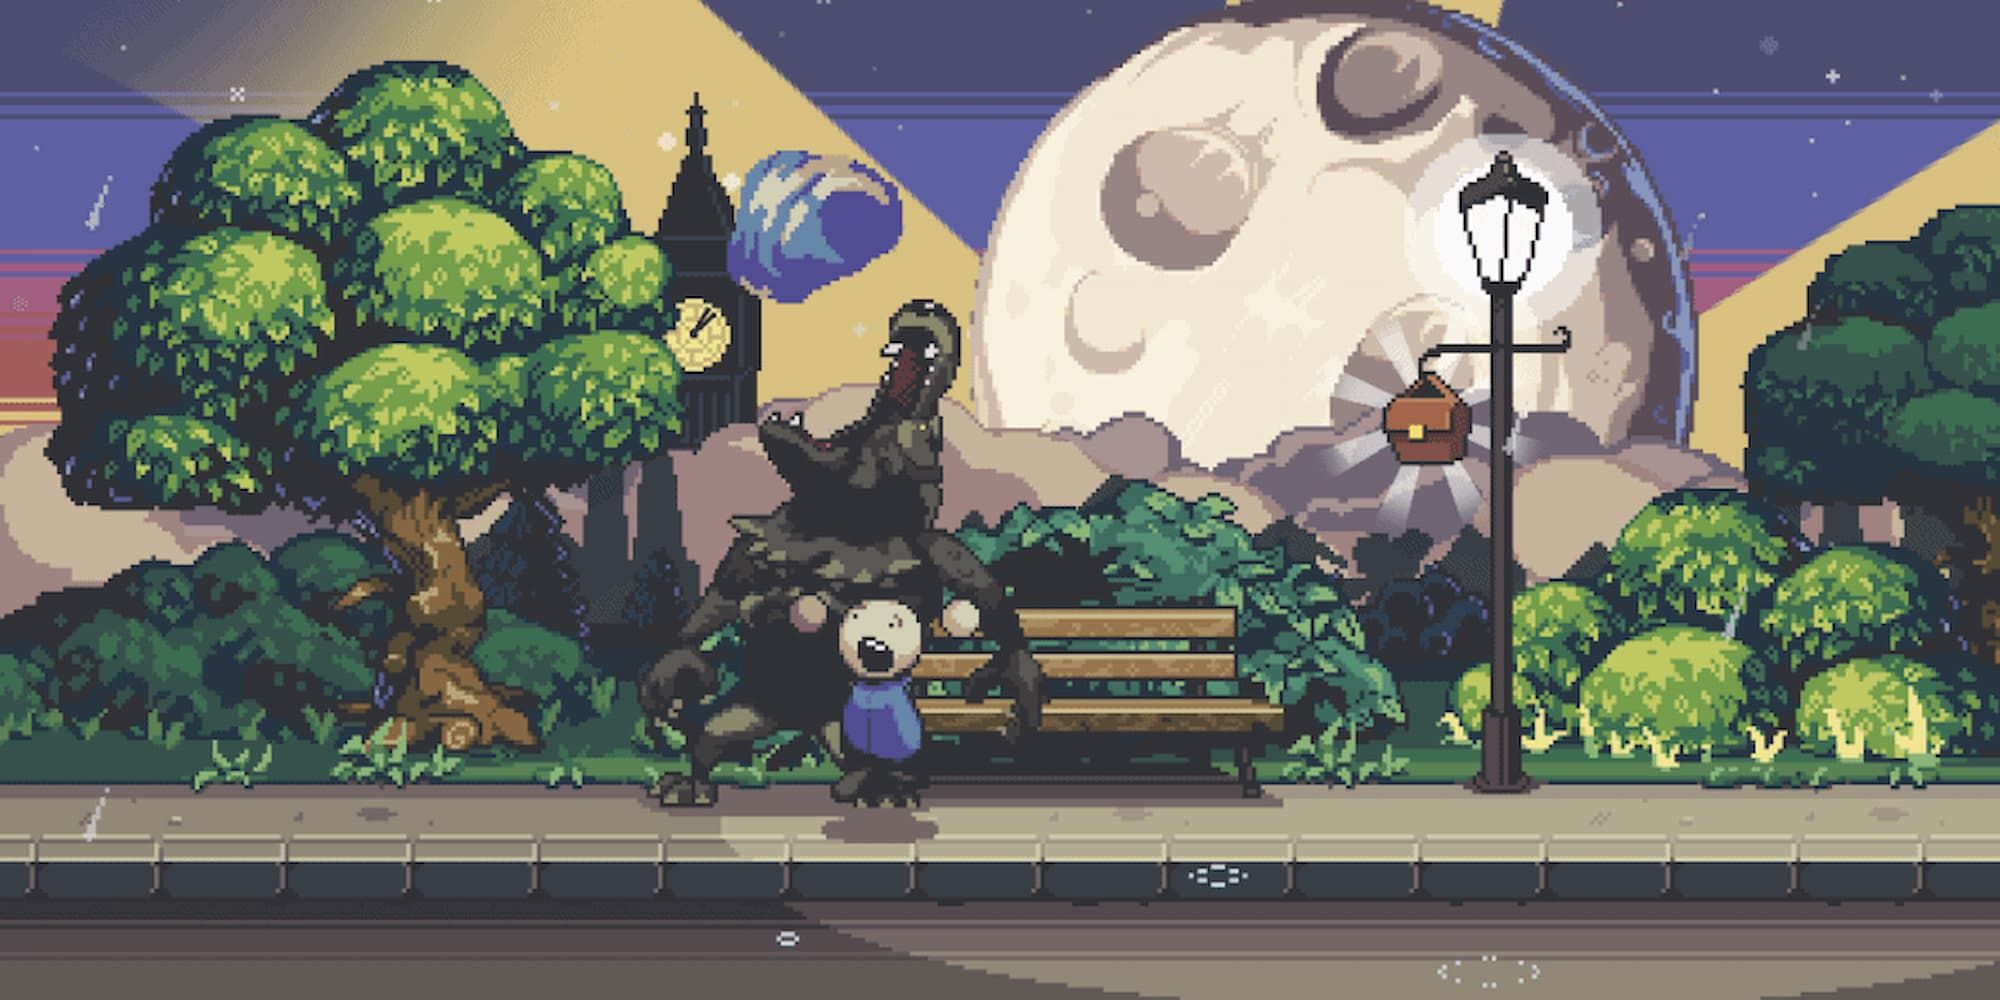 The werewolf emerges from behind the park bench to eat a citizen of the city in Werewolf Tycoon.